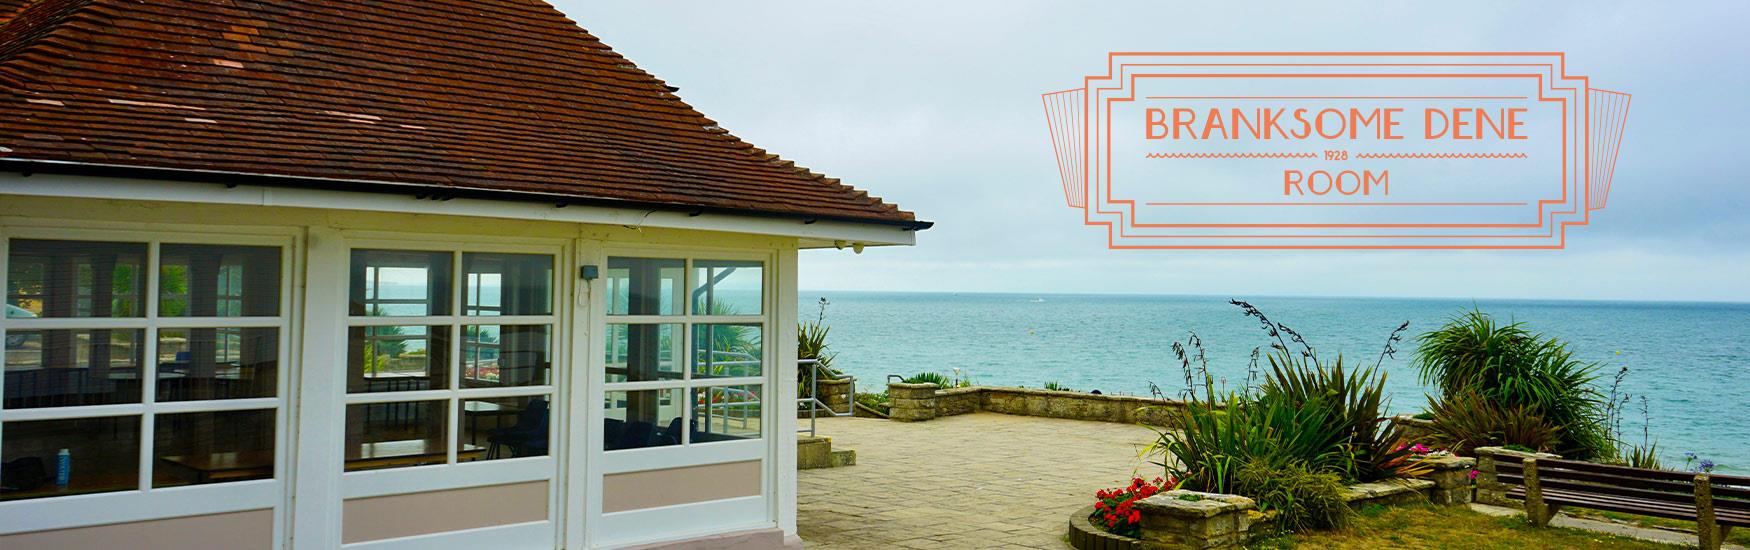 Stunning shot of Branksome dene room with beach in the background and the logo placed on top of the image